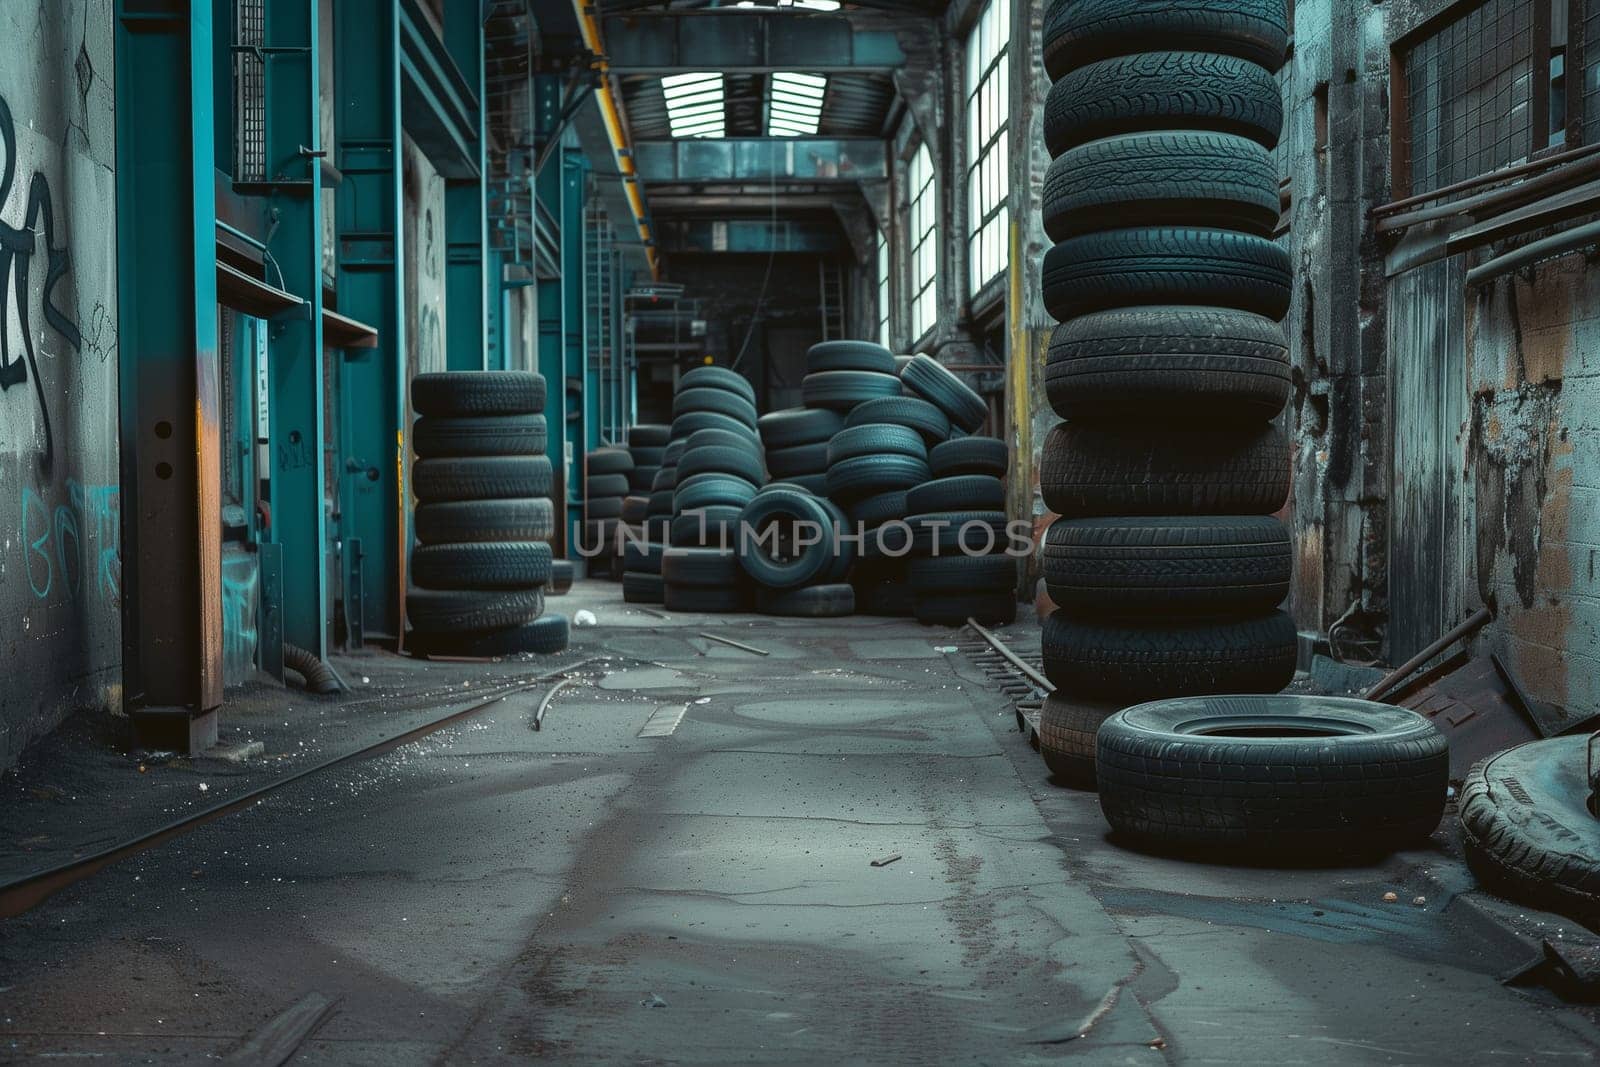 A warehouse storing a large quantity of car tires neatly arranged next to a wall, showcasing a vast inventory of automotive products.